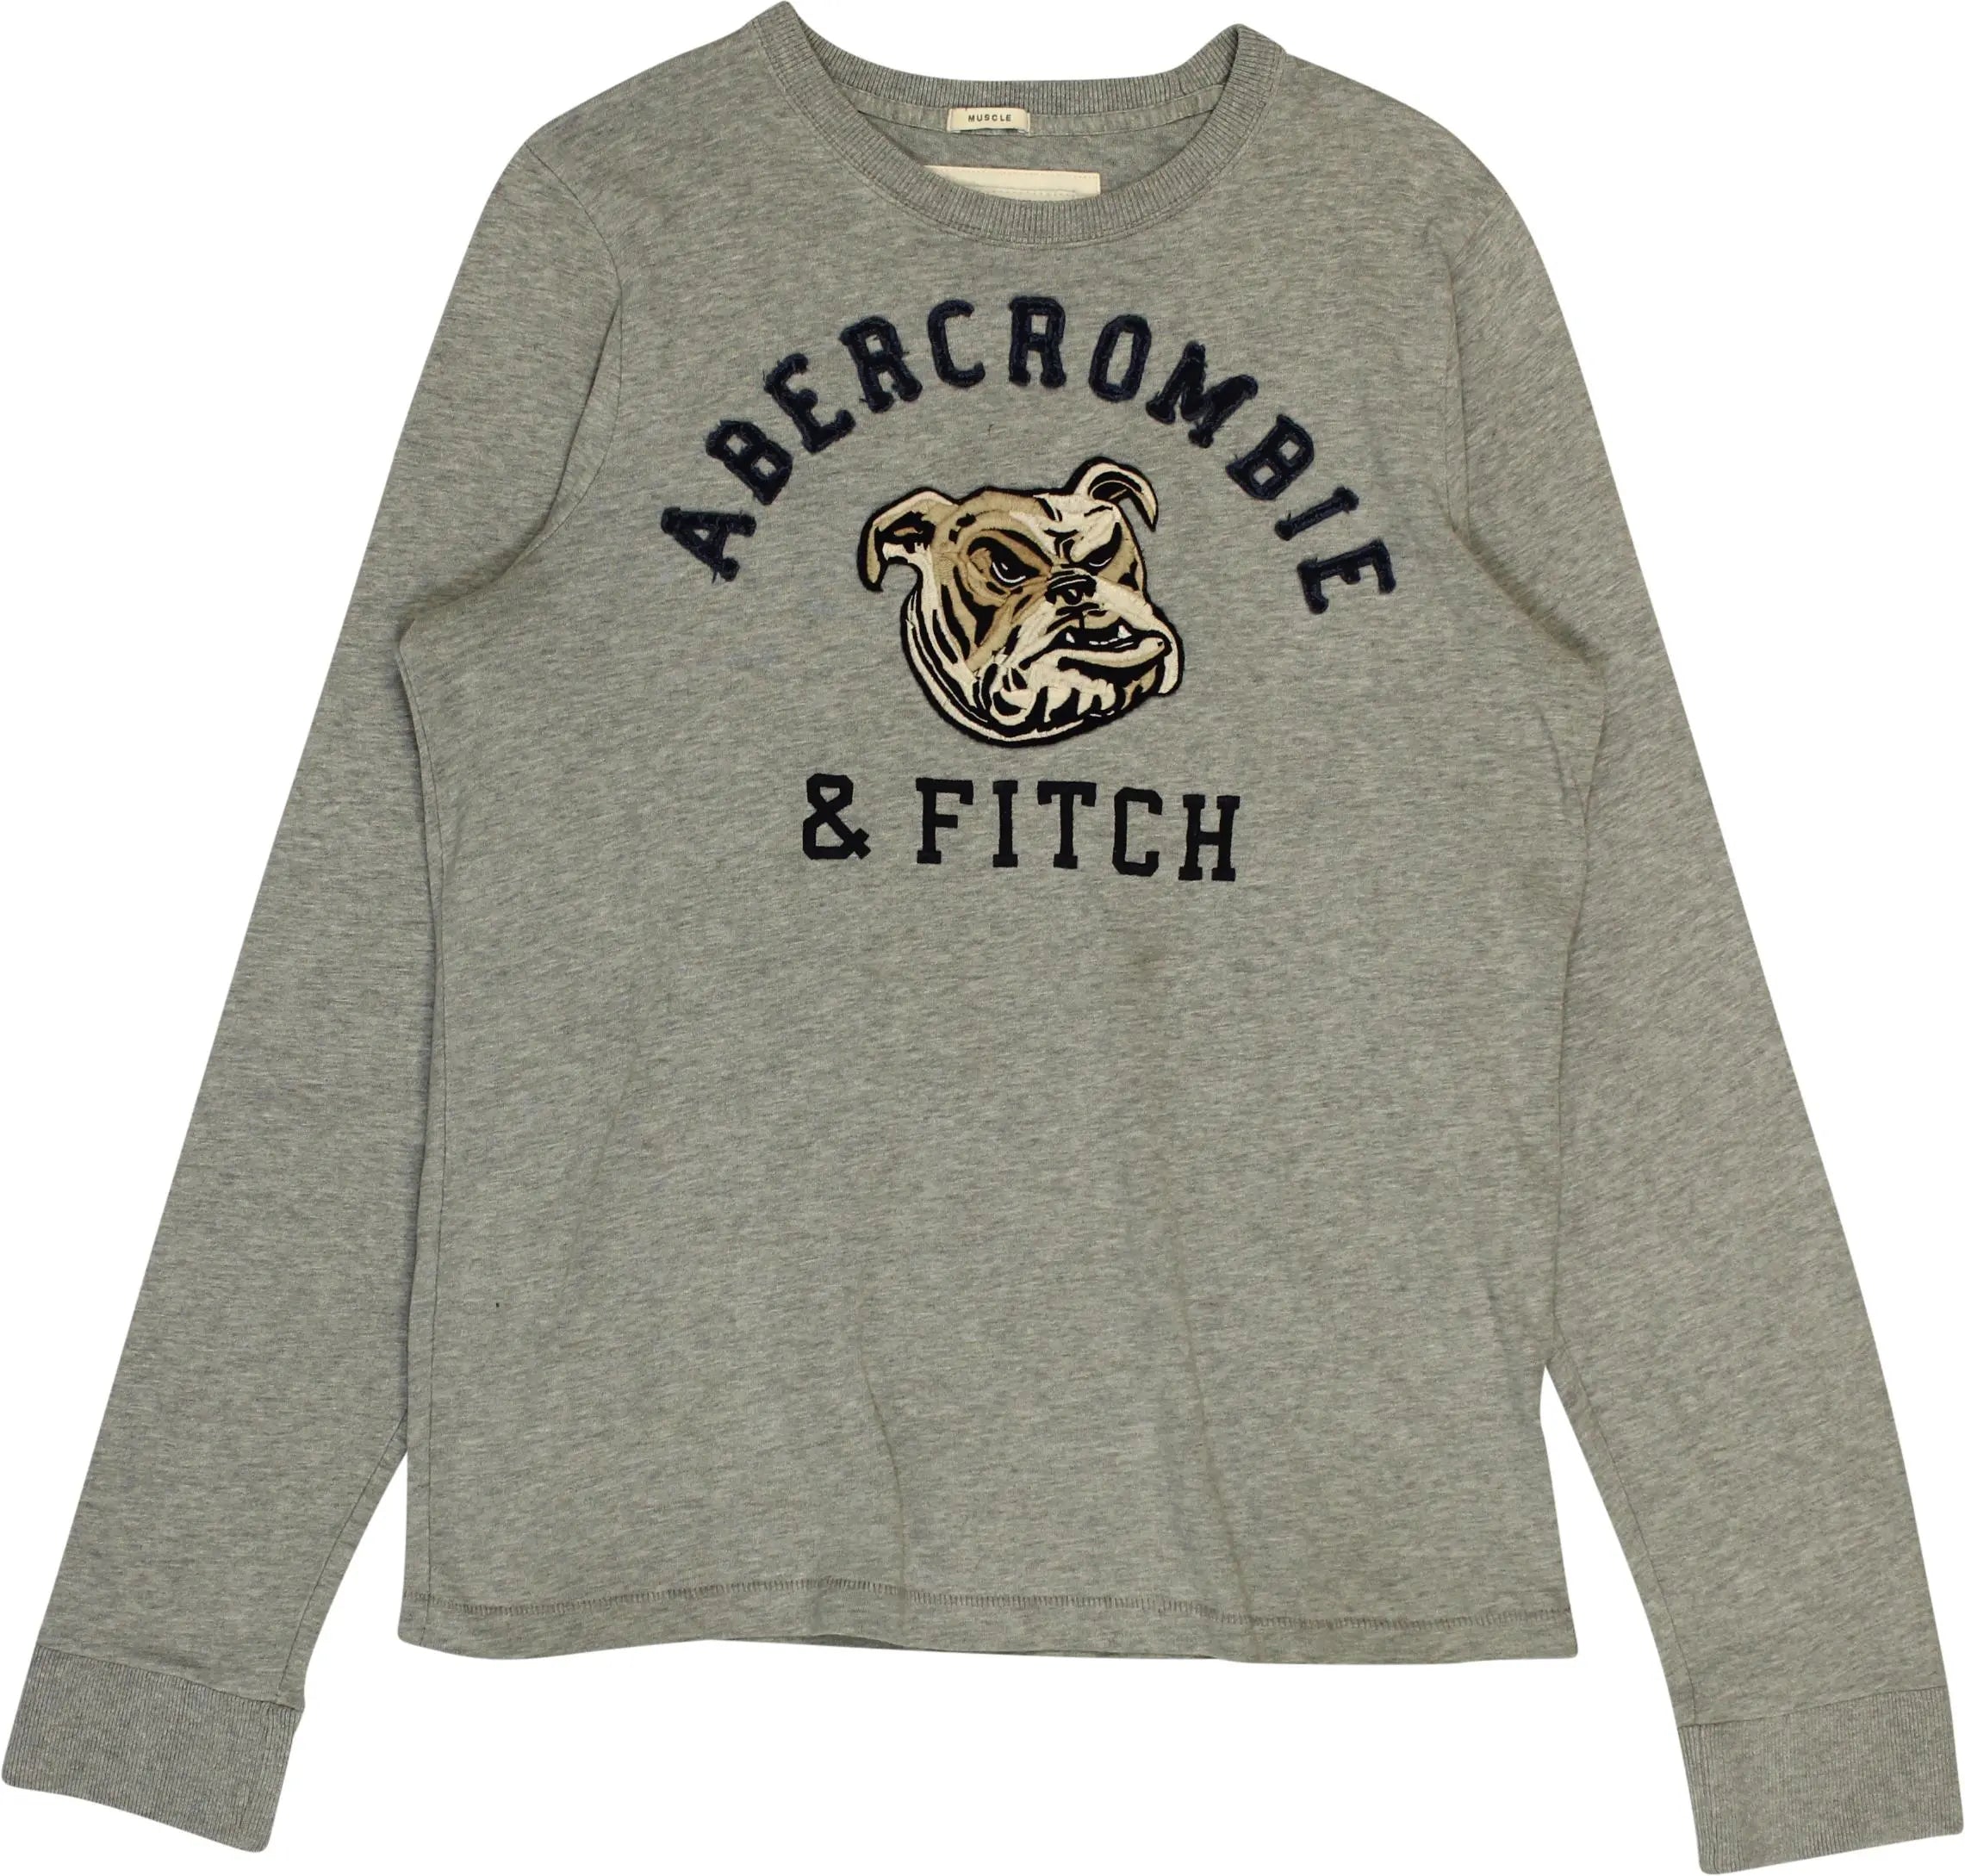 Abercrombie & Fitch - Abercrombie & Fitch Long Sleeve T-Shirt- ThriftTale.com - Vintage and second handclothing